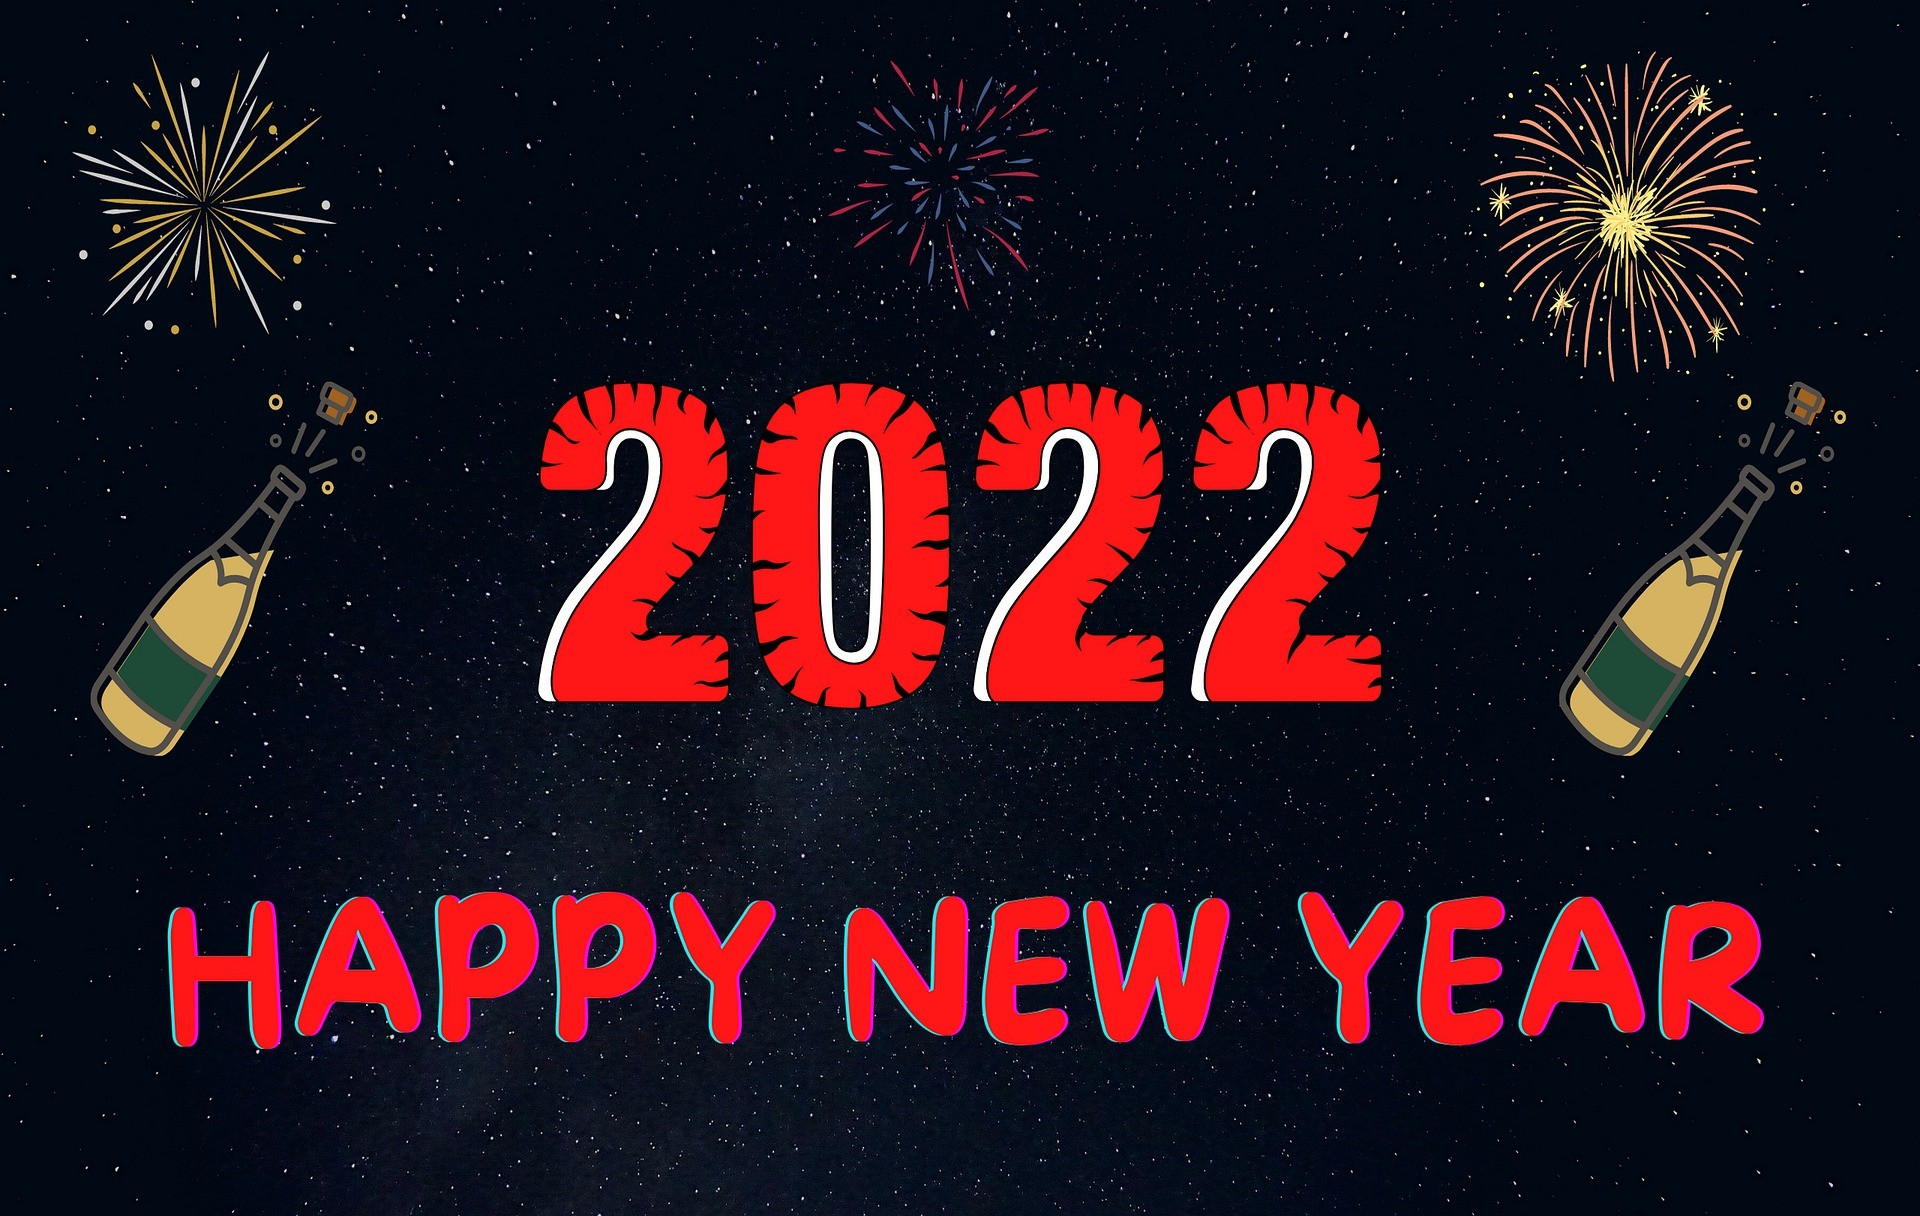 Happy new year 2022 wishes images | Happy new year 2022